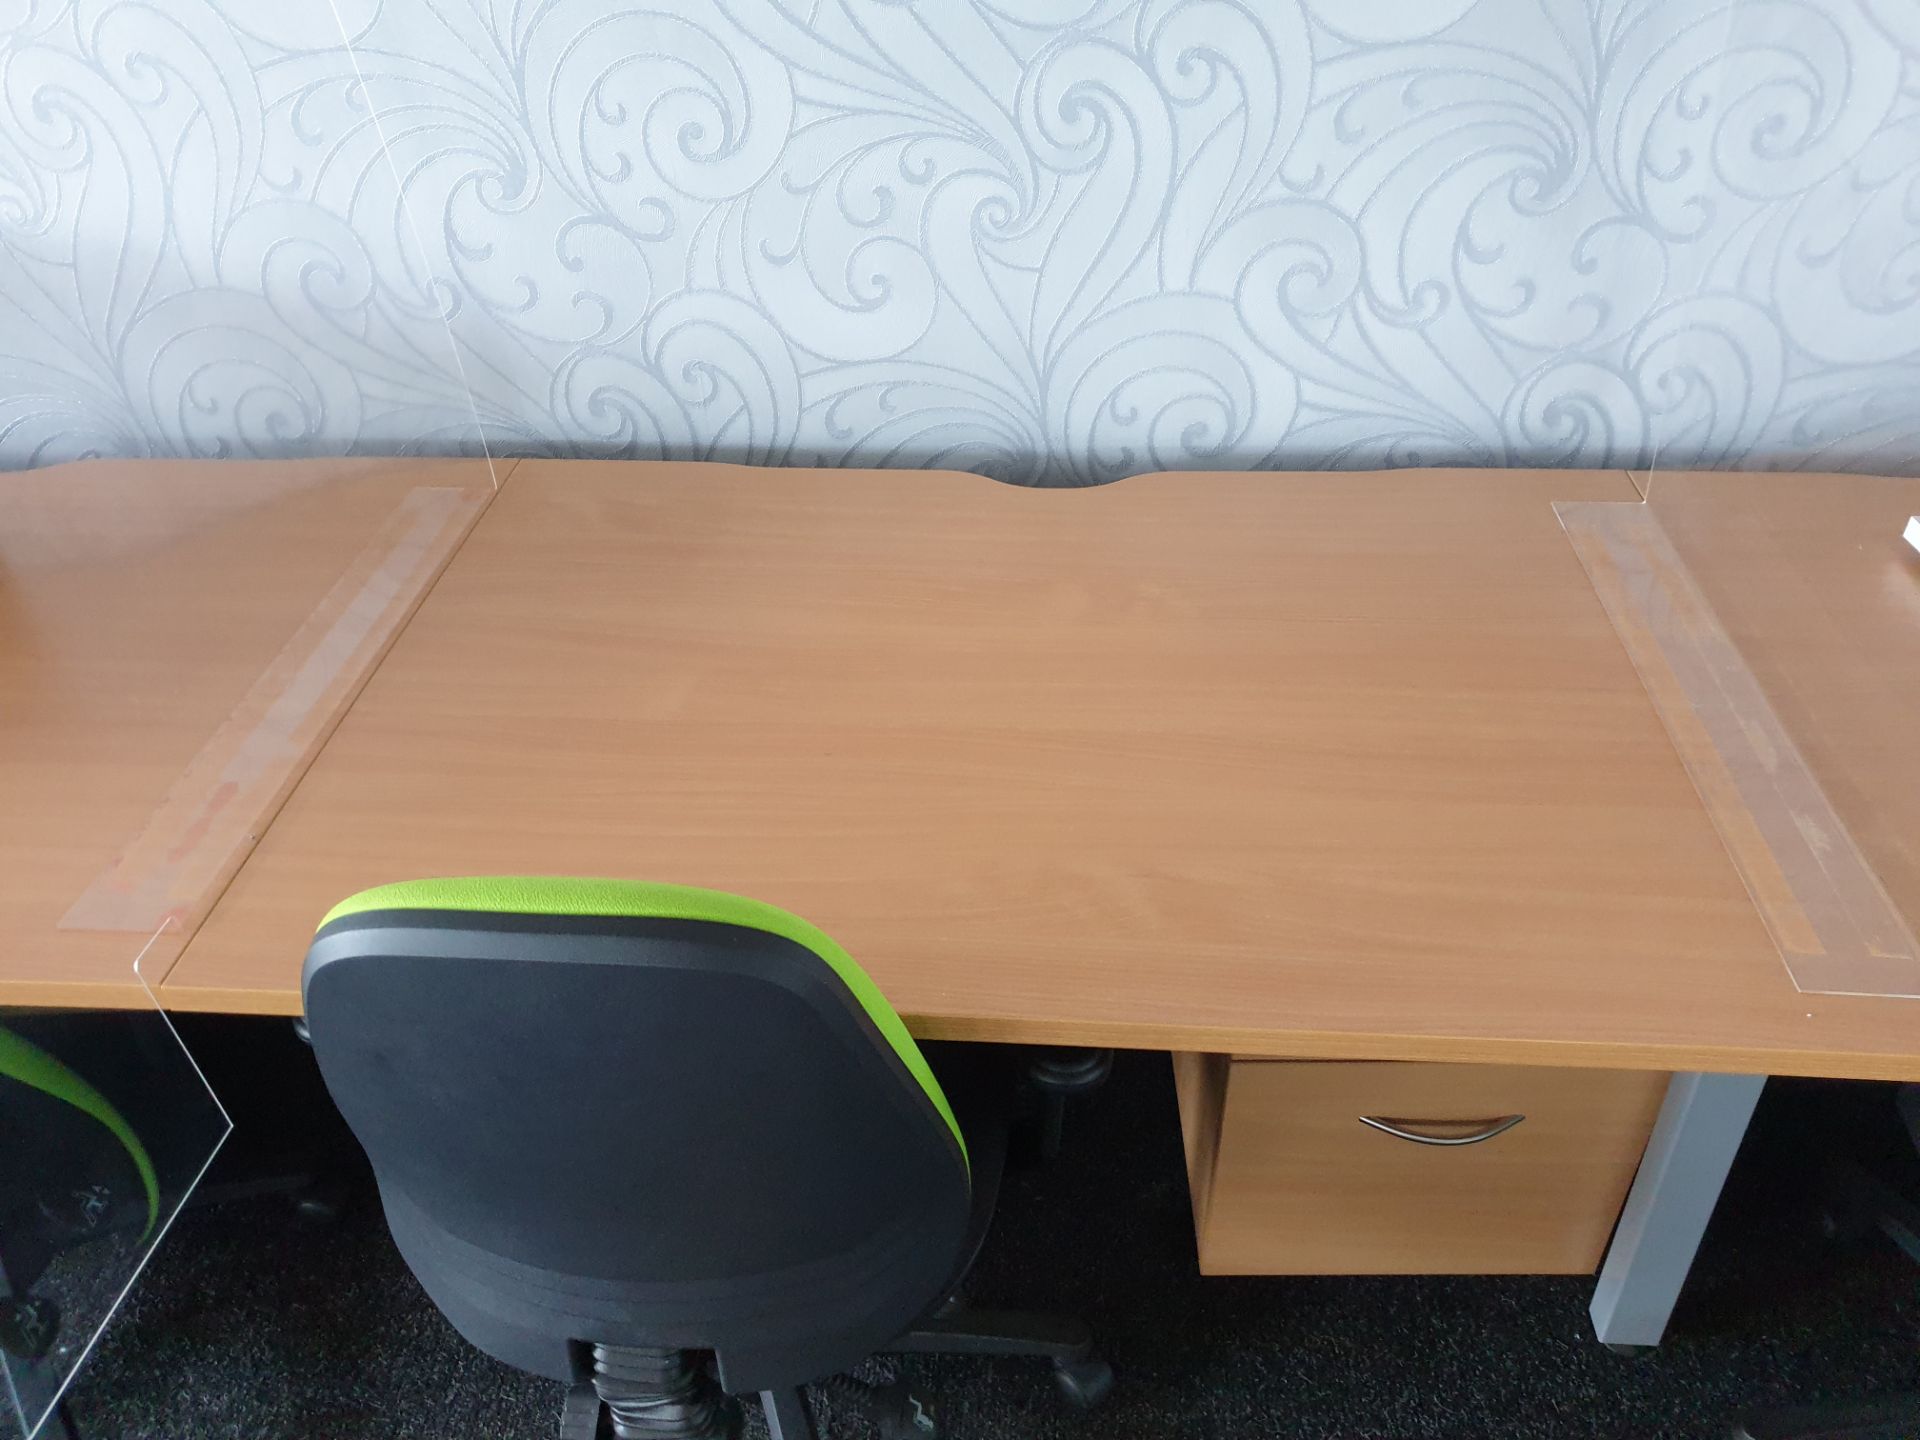 5 Person Workstation / Desks with covid screens - Image 2 of 4